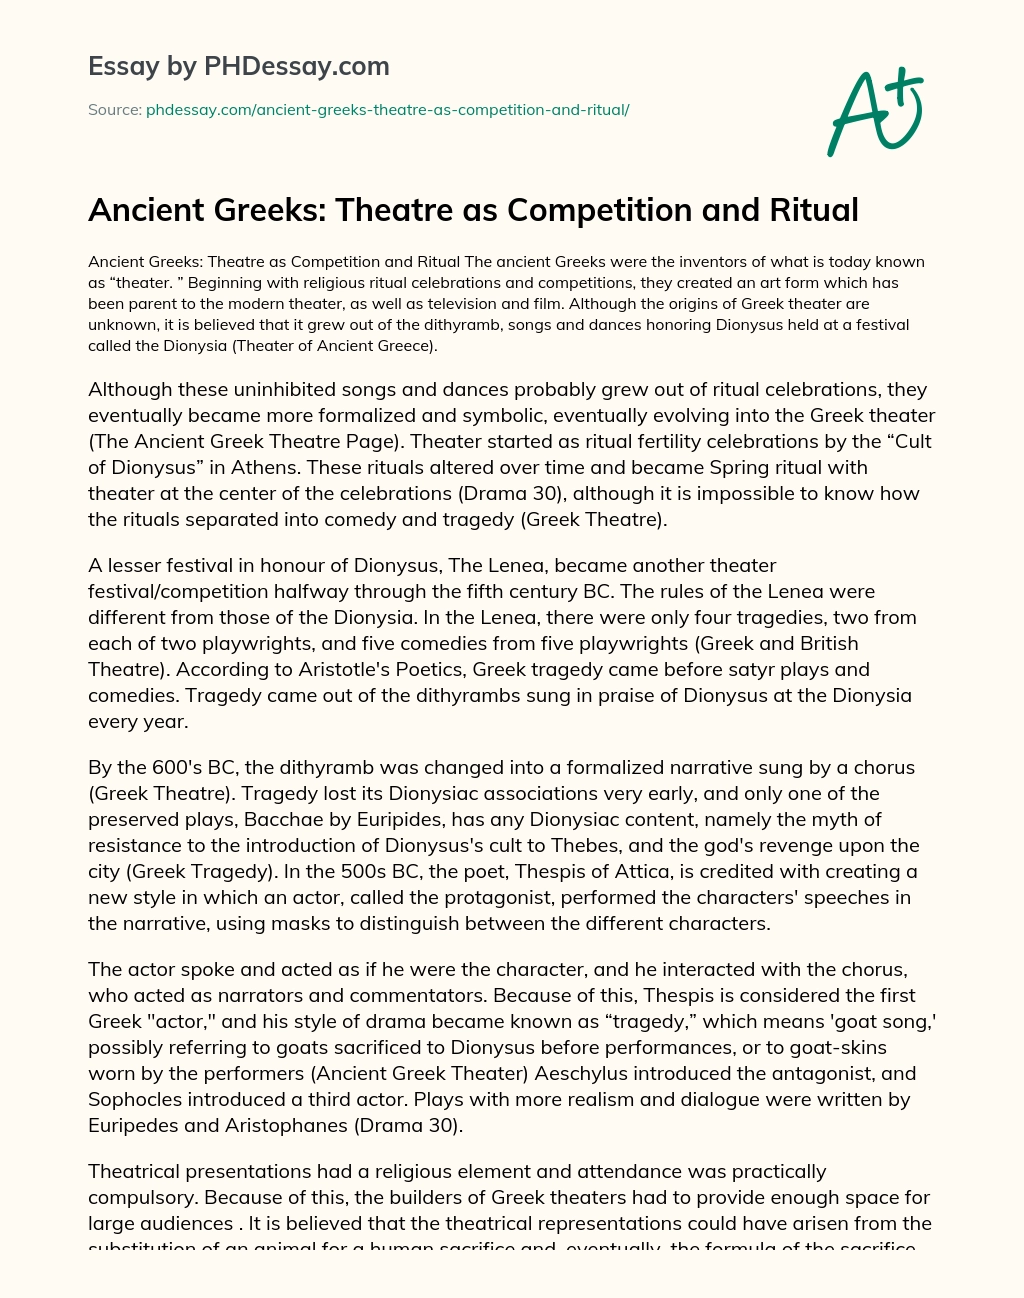 Ancient Greeks: Theatre as Competition and Ritual essay